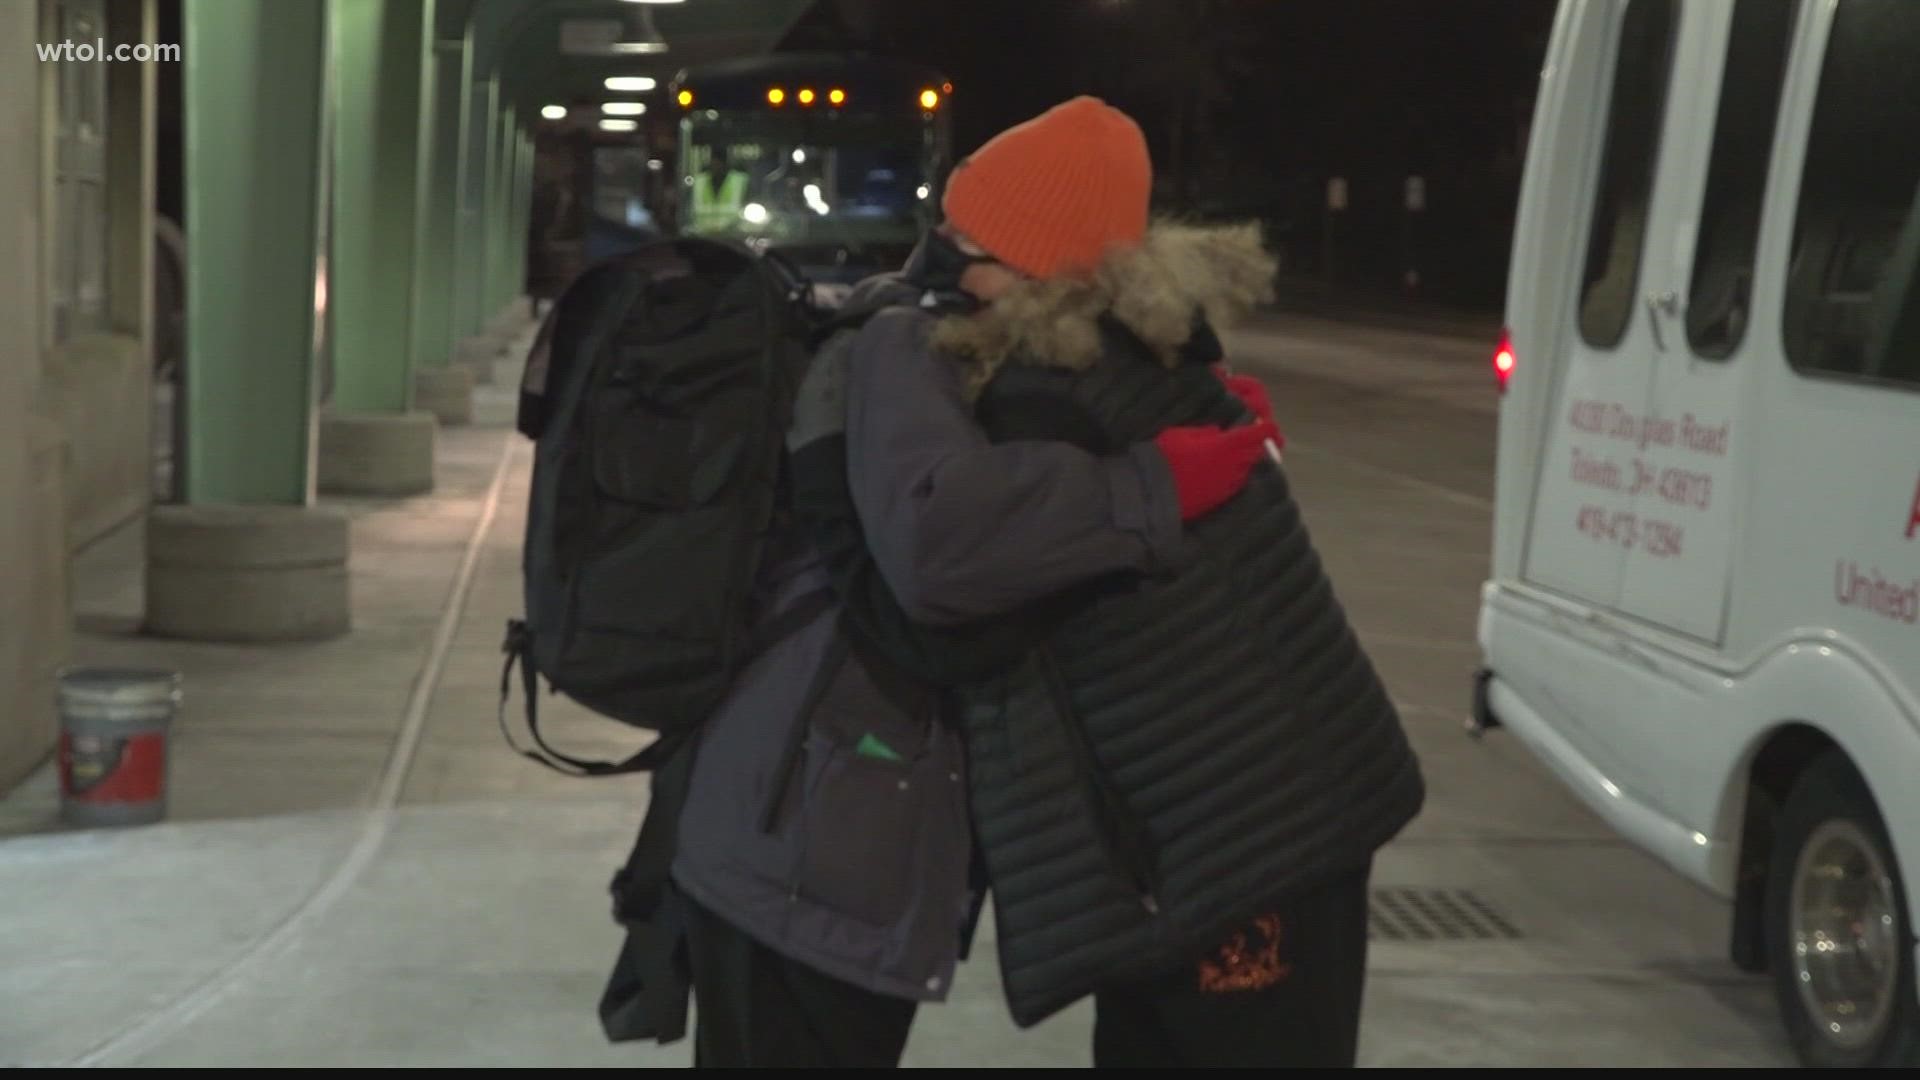 S.T.A.R.S. is a nonprofit that serves the homeless in Toledo. The organization is helping those less fortunate with supplies during these cold winter nights.